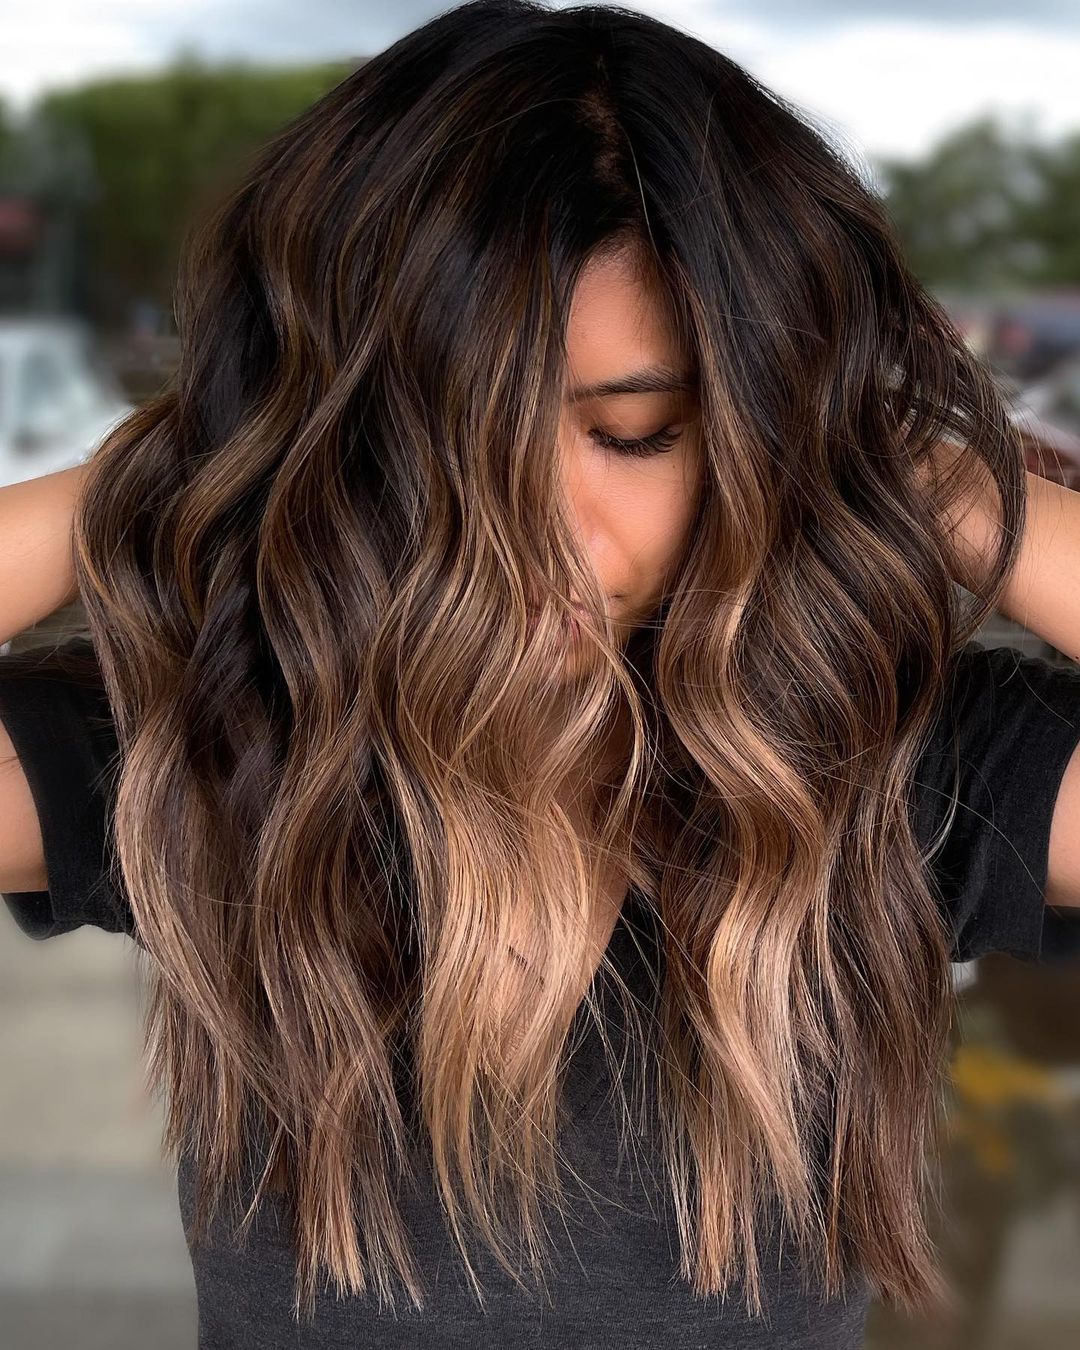 Caramel Brown Hair With Front Highlights